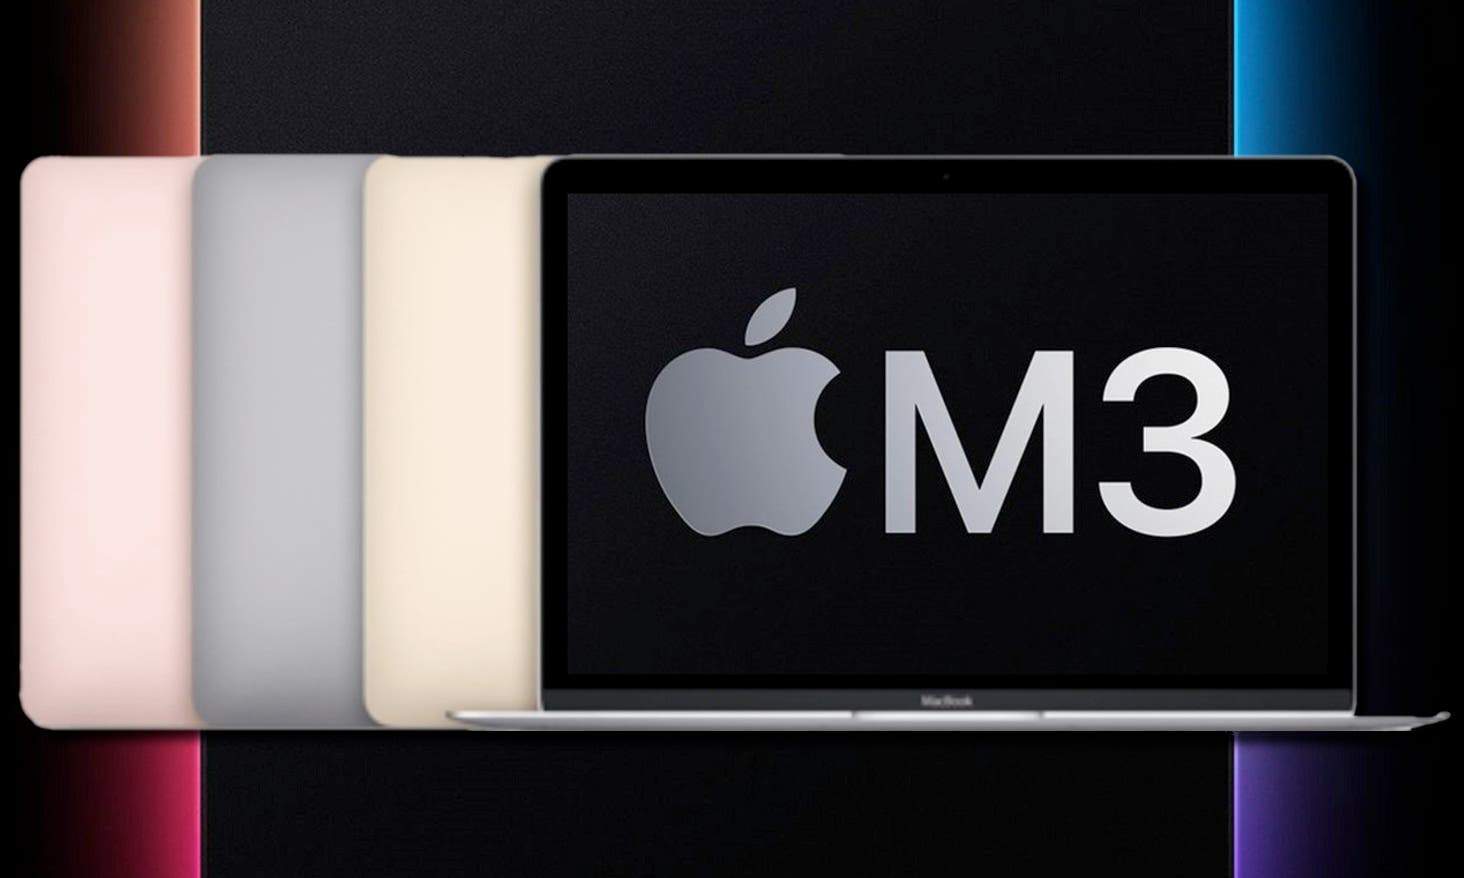 From MacBook Air to iMac: How the M3 Chip Will Power Them All